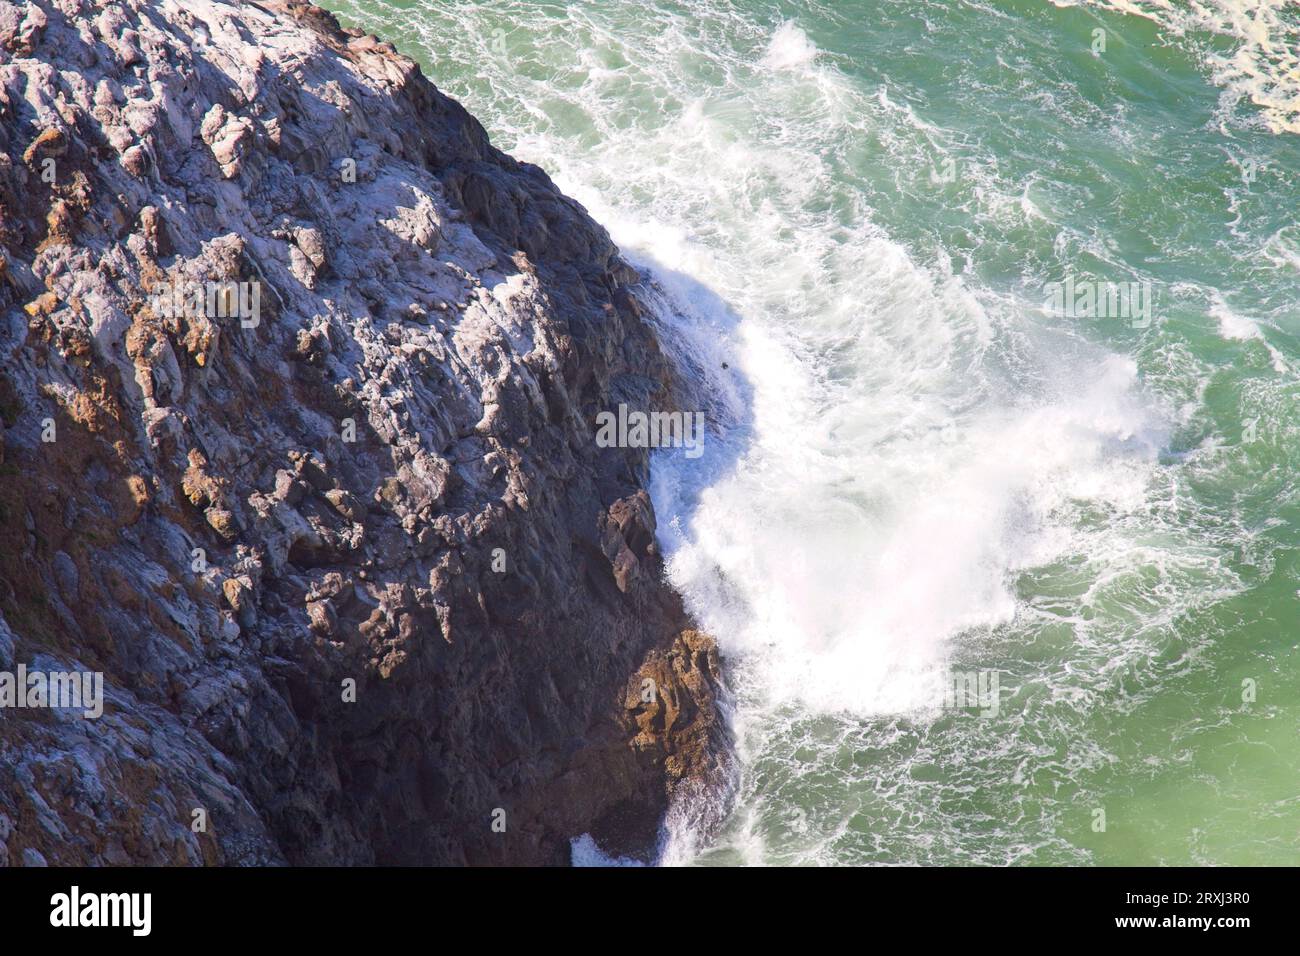 The Pacific Ocean beating up against the rocky coast in Oregon. Stock Photo